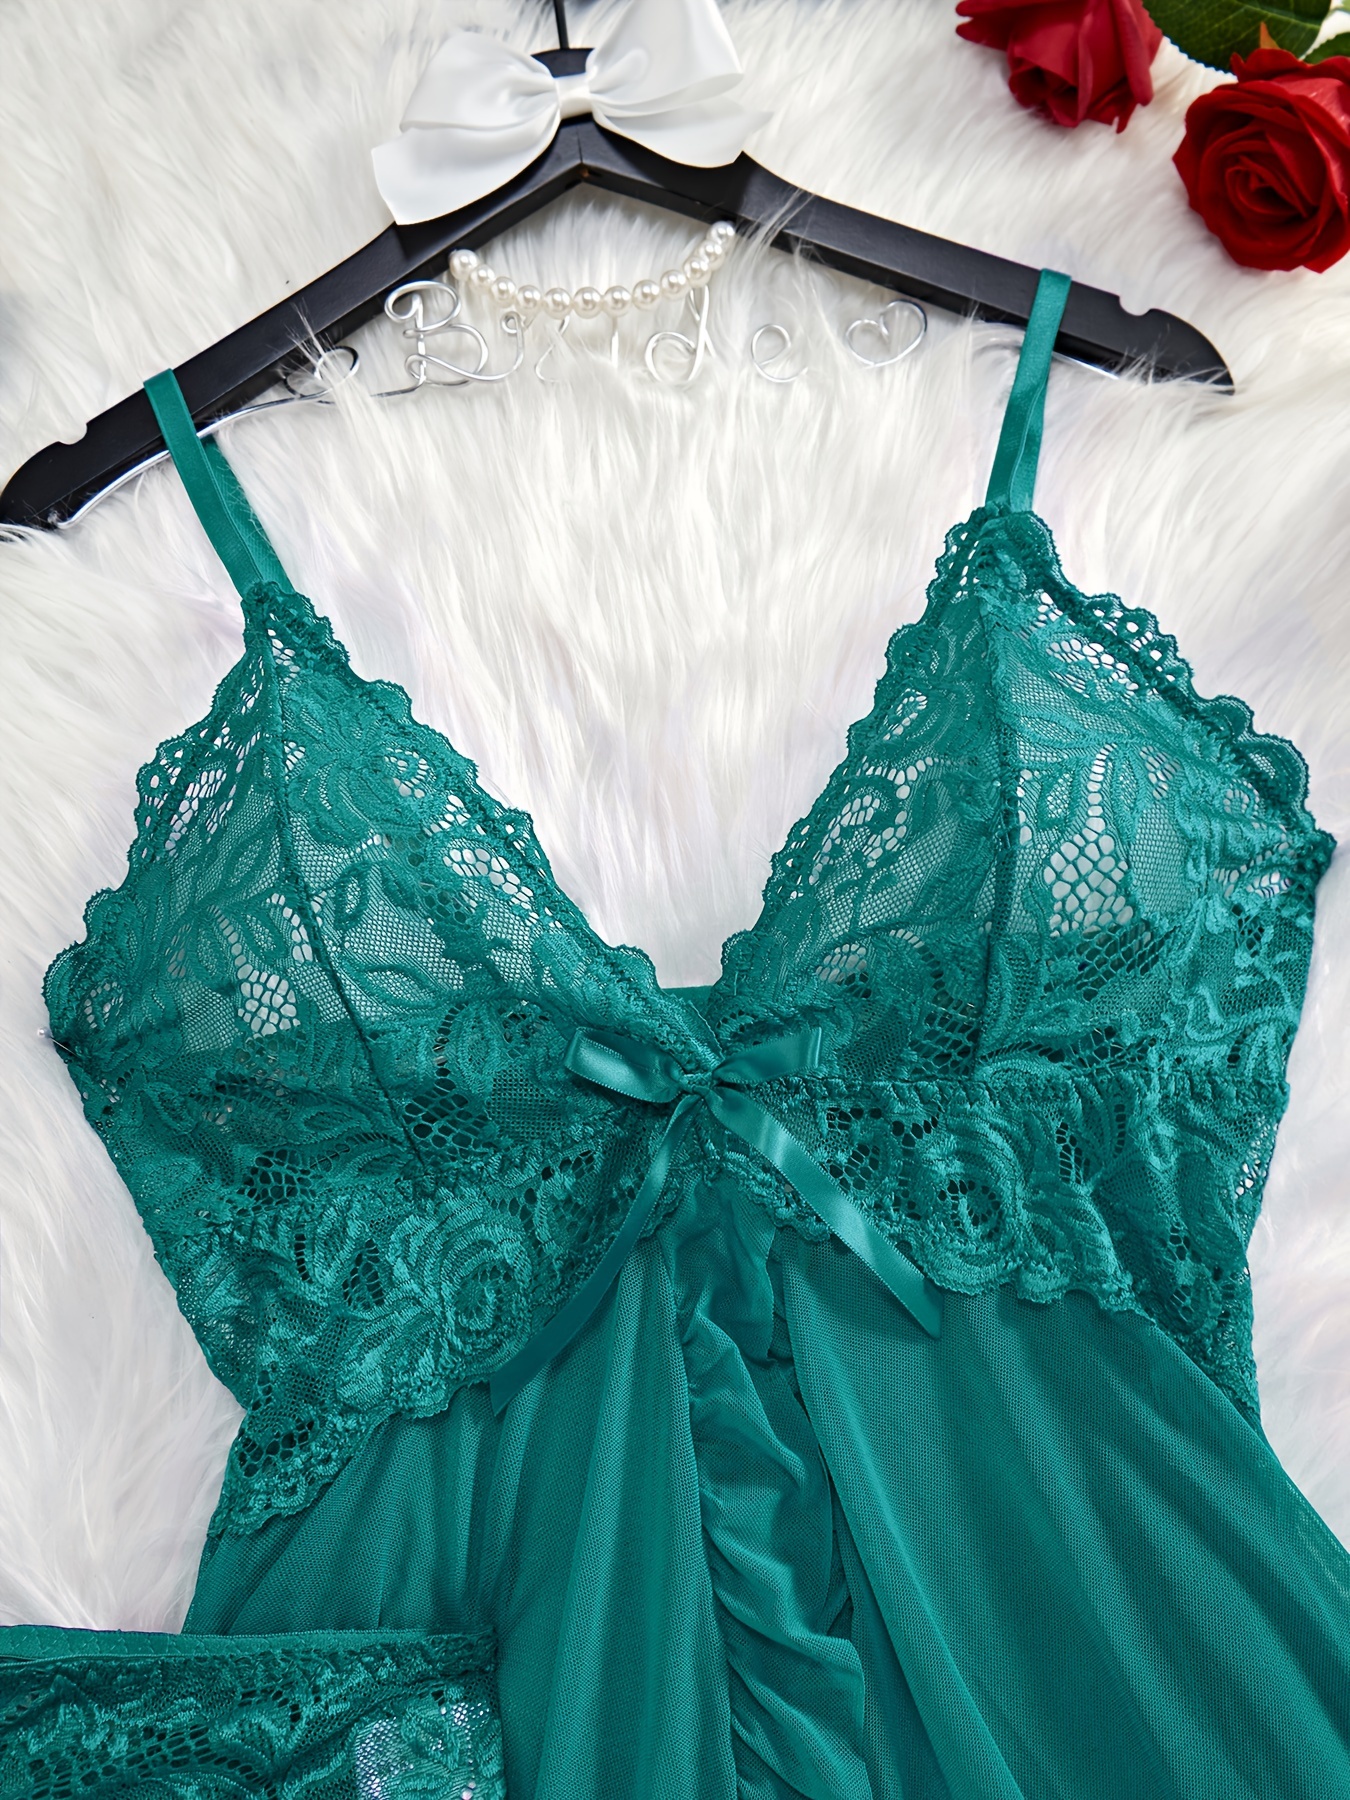 Nighty New Ladies Night Suit Wear Panty For Women Green Colour Lingerie